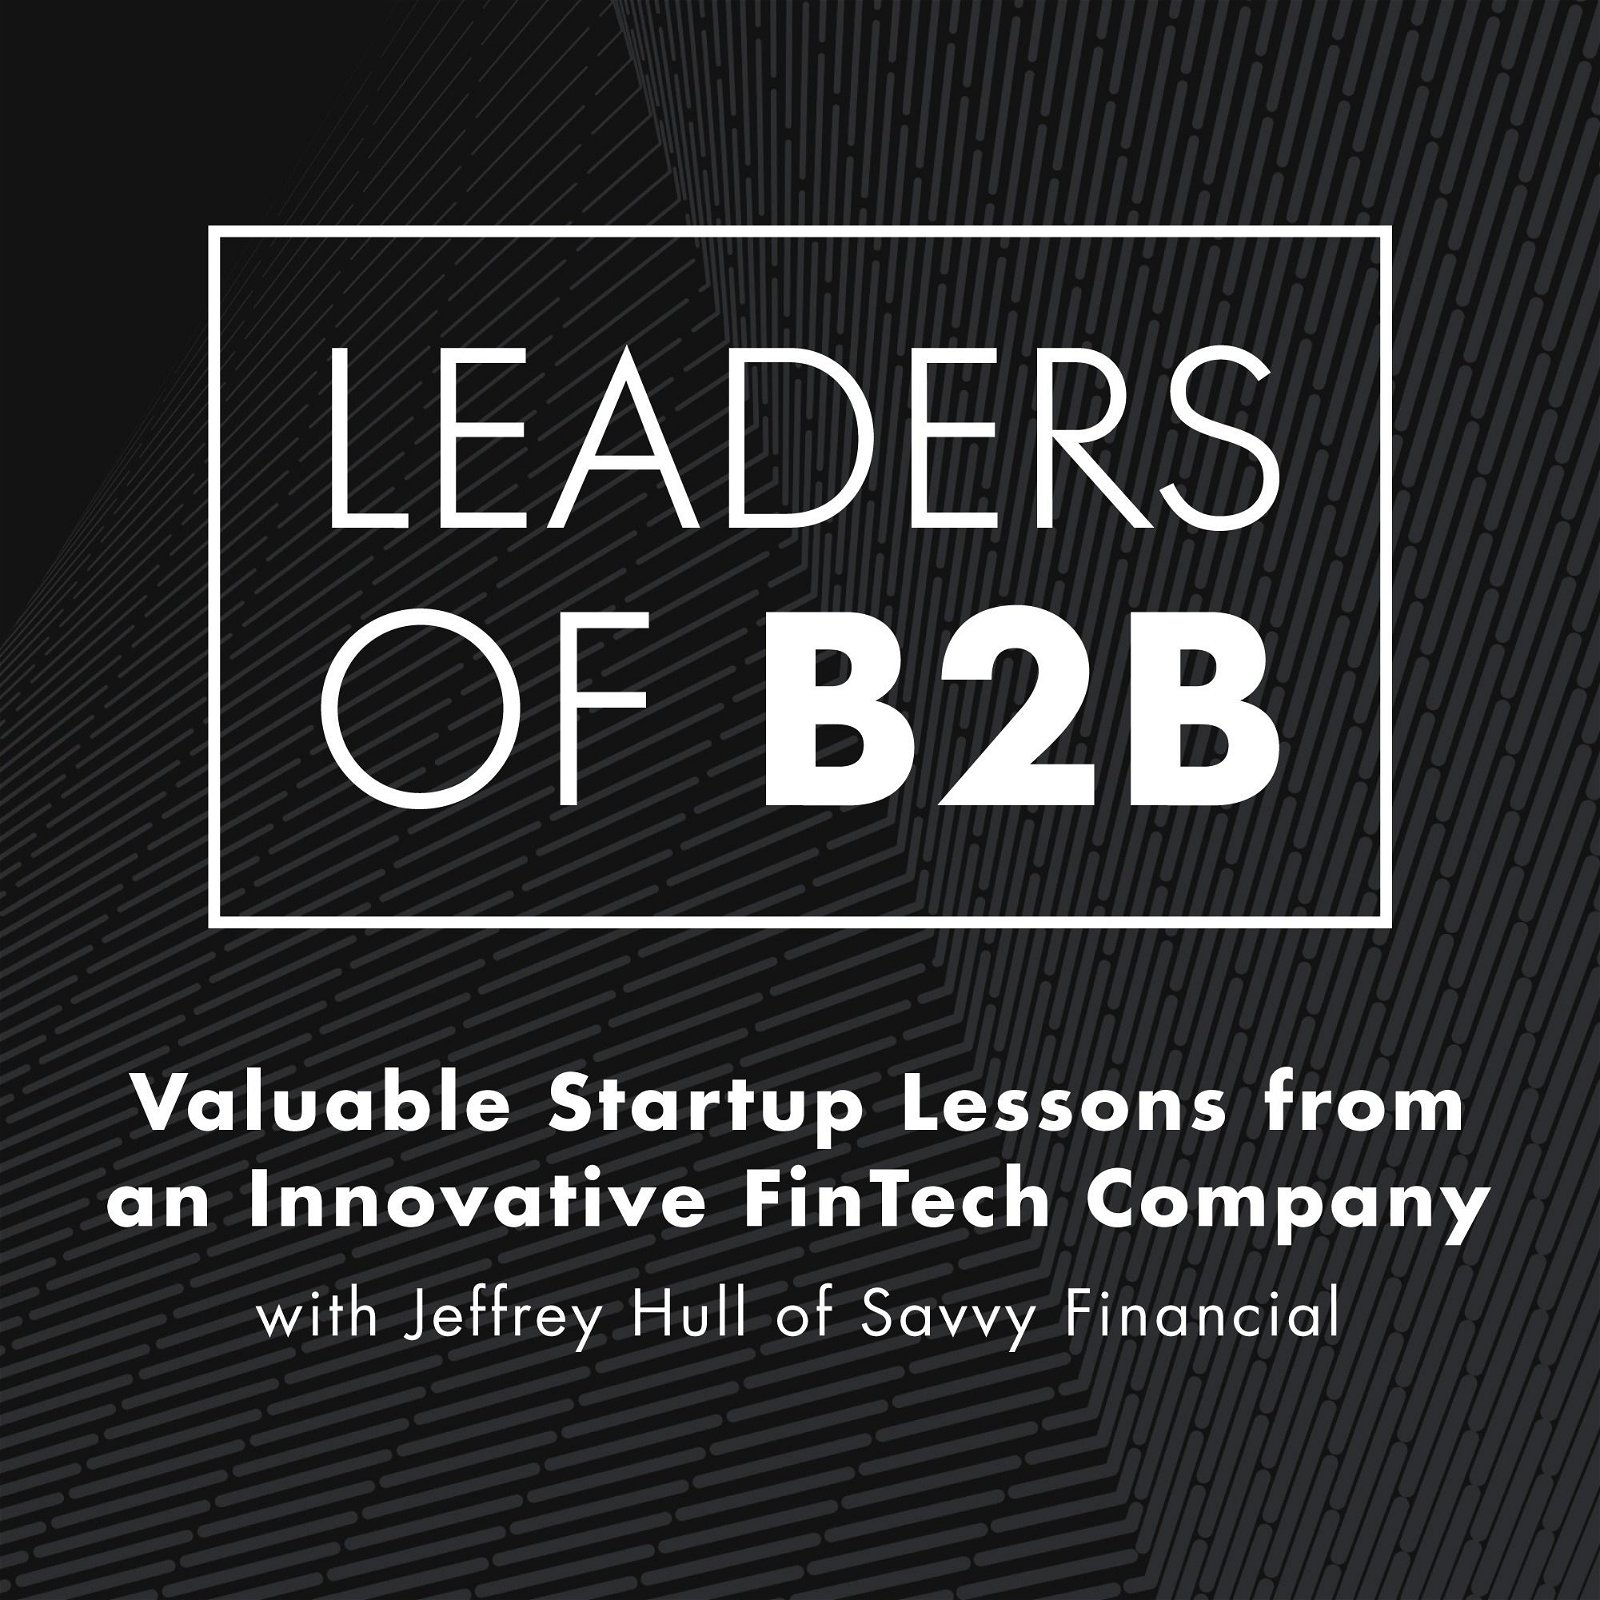 Valuable Startup Lessons from an Innovative FinTech Company with Jeffrey Hull of Savvy Financial